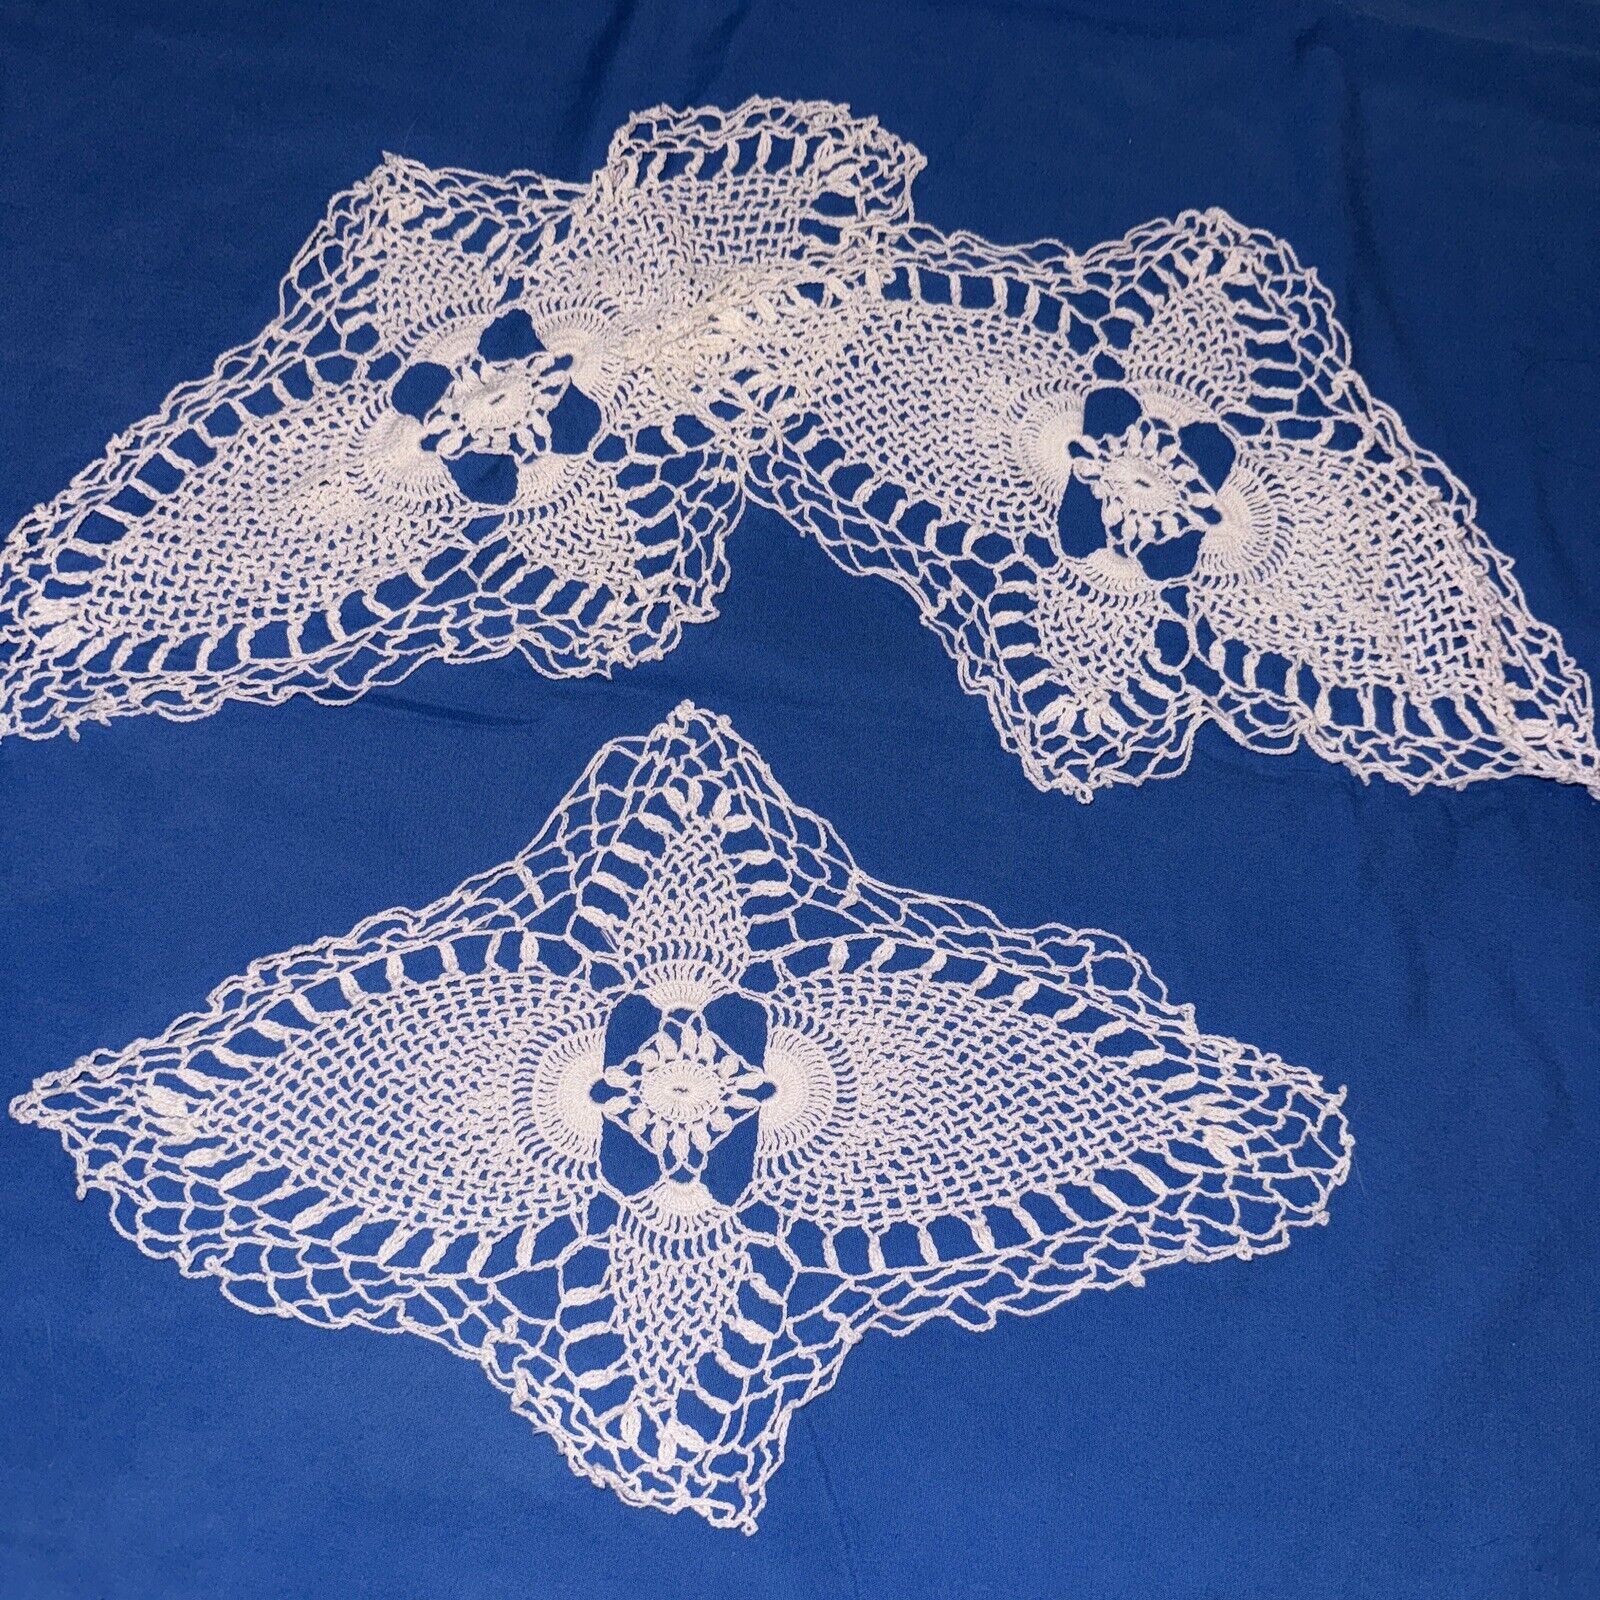 lot of 3 doilie doily vintage dainty white 14.5x9 inch flower